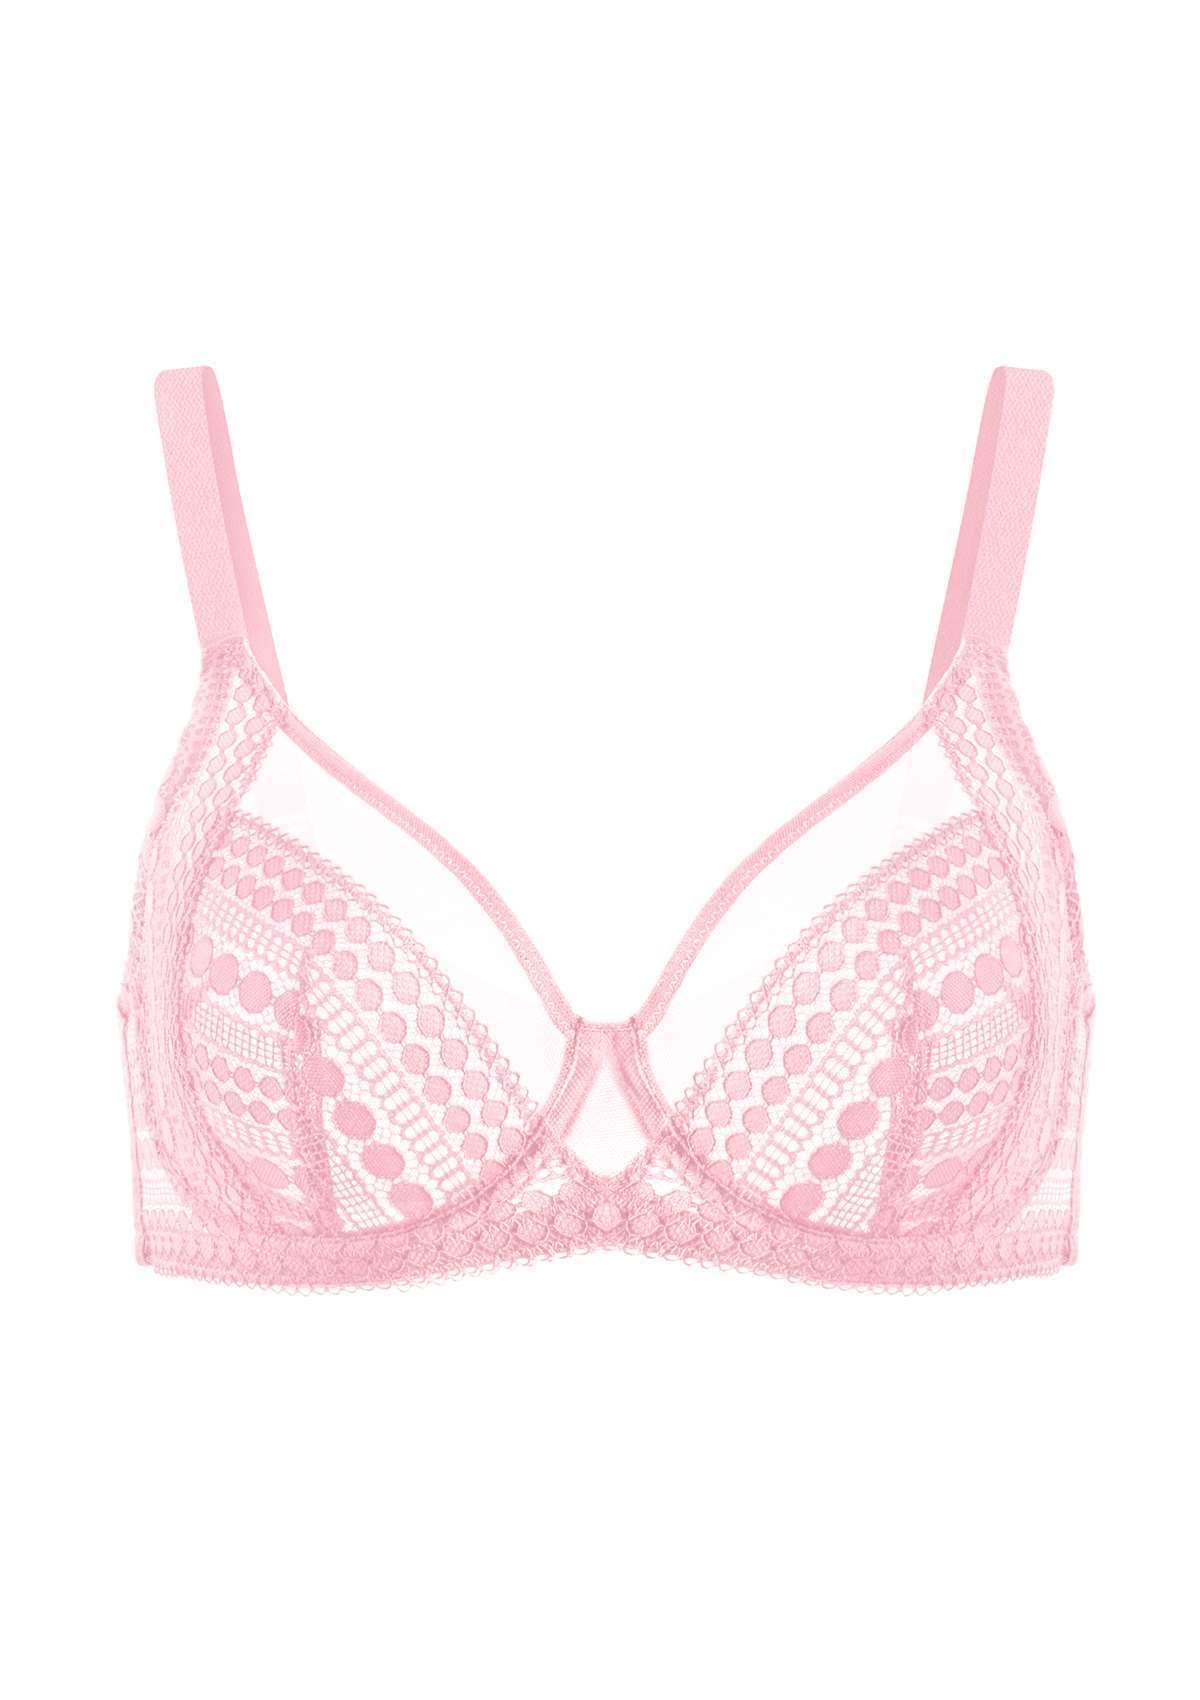 HSIA Heroine Lace Bra And Panties Set: Most Comfortable Supportive Bra - Pink / 34 / DD/E